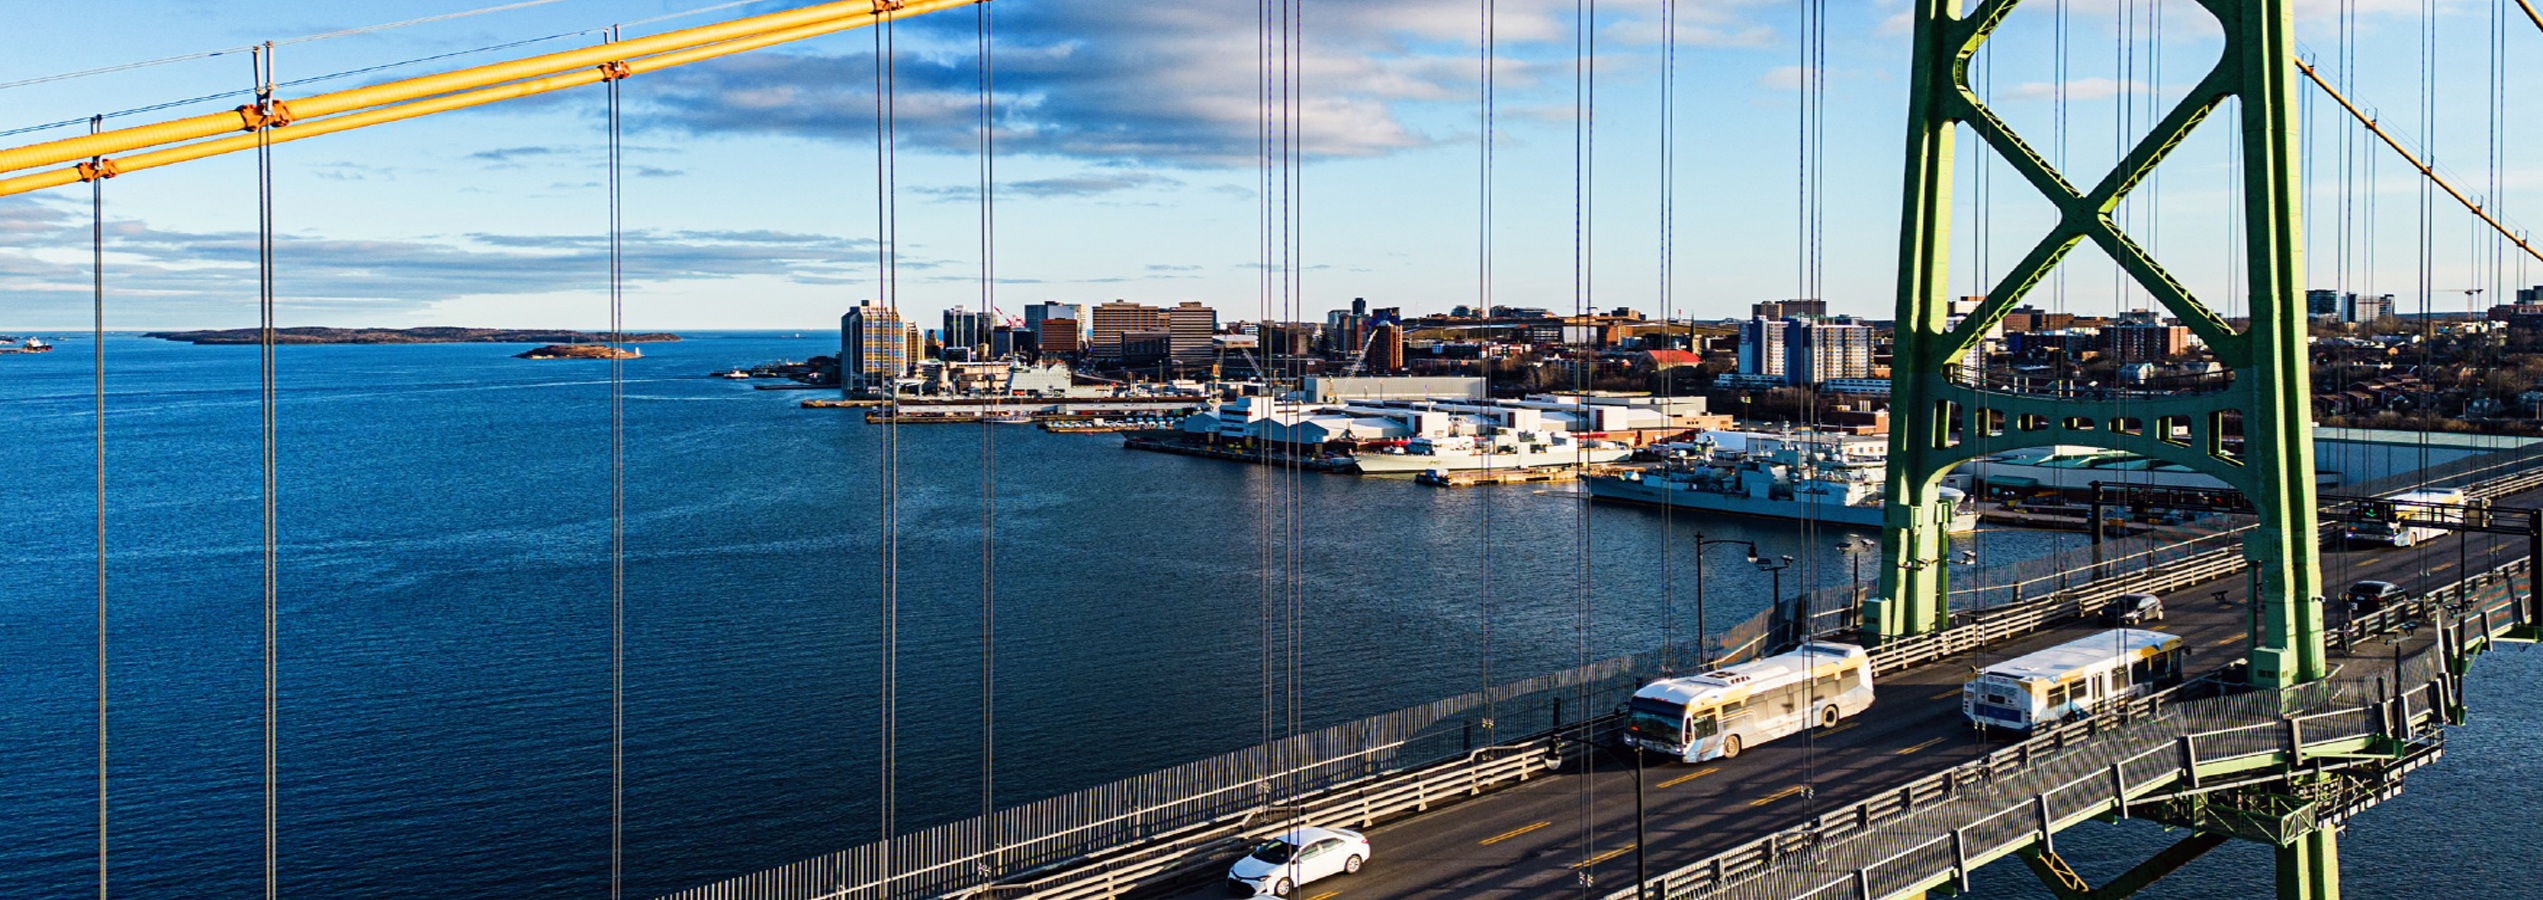 Aerial view of transit buses crossing a suspension bridge overlooking a harbour.